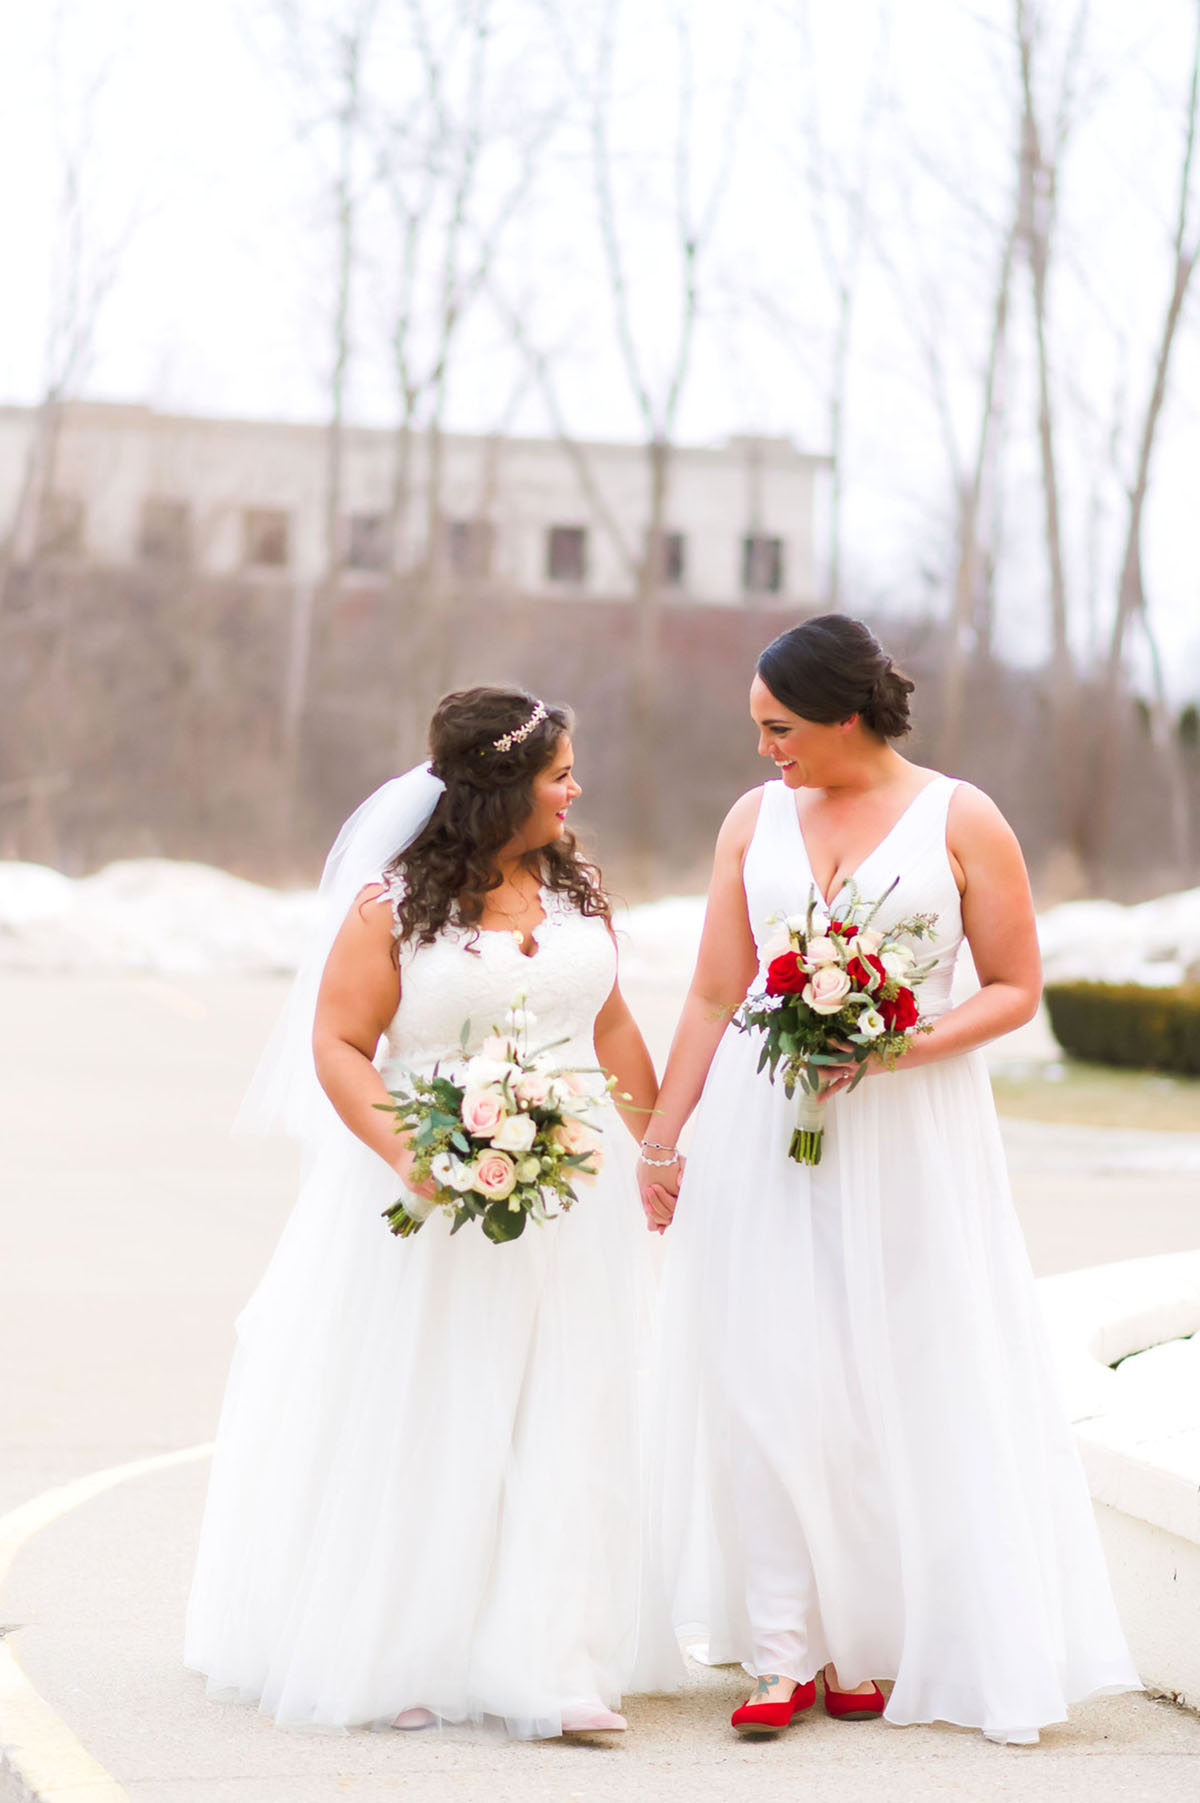 Winter wedding in Troy, Michigan two brides long white dresses flower crowns rose bouquets